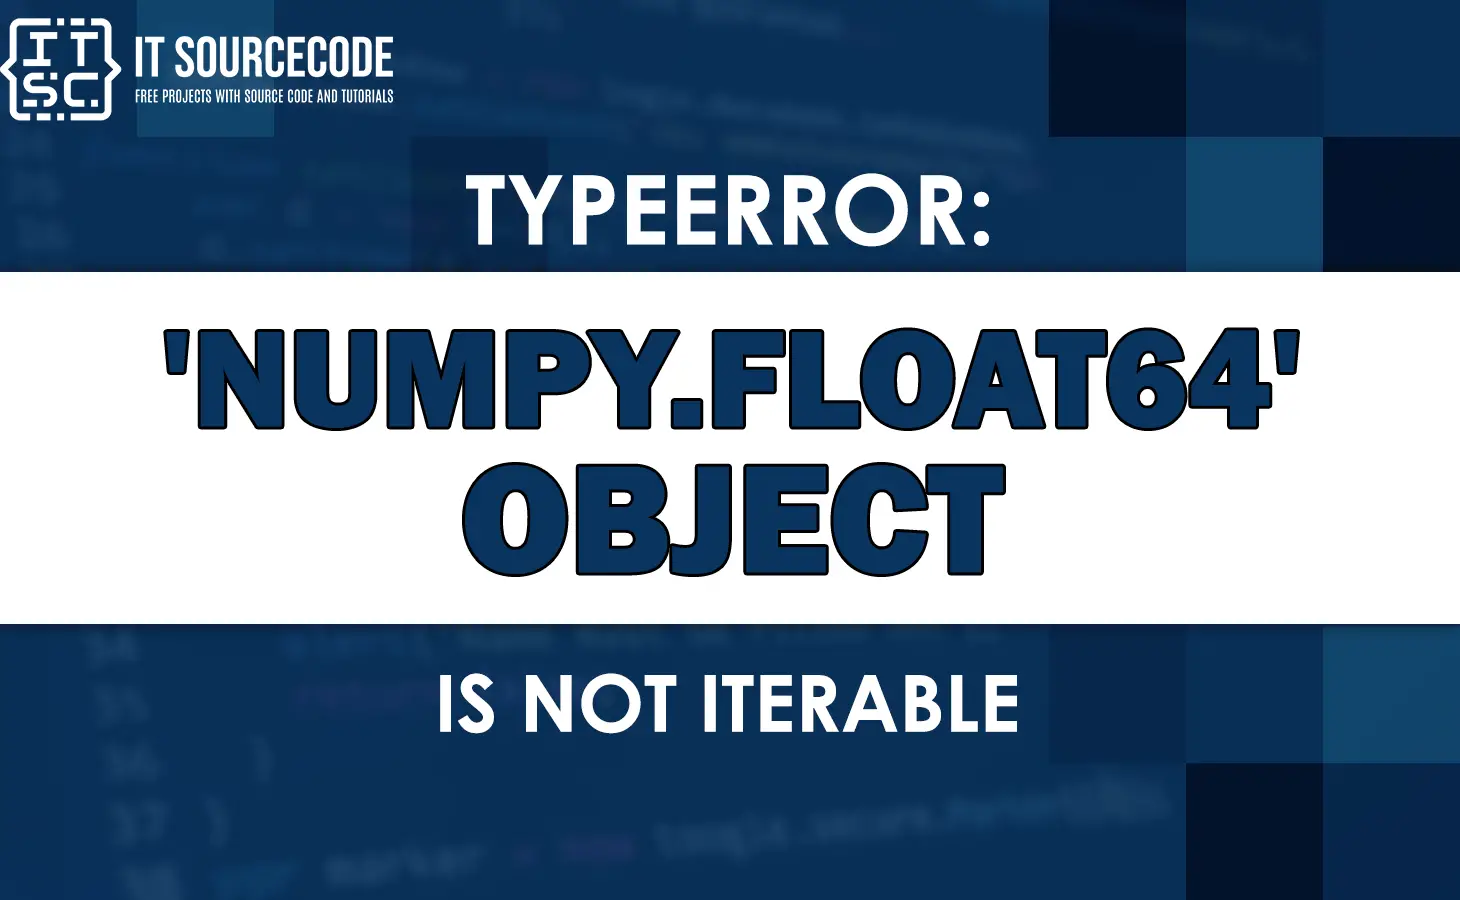 Typeerror: numpy.float64 object is not iterable [SOLVED]